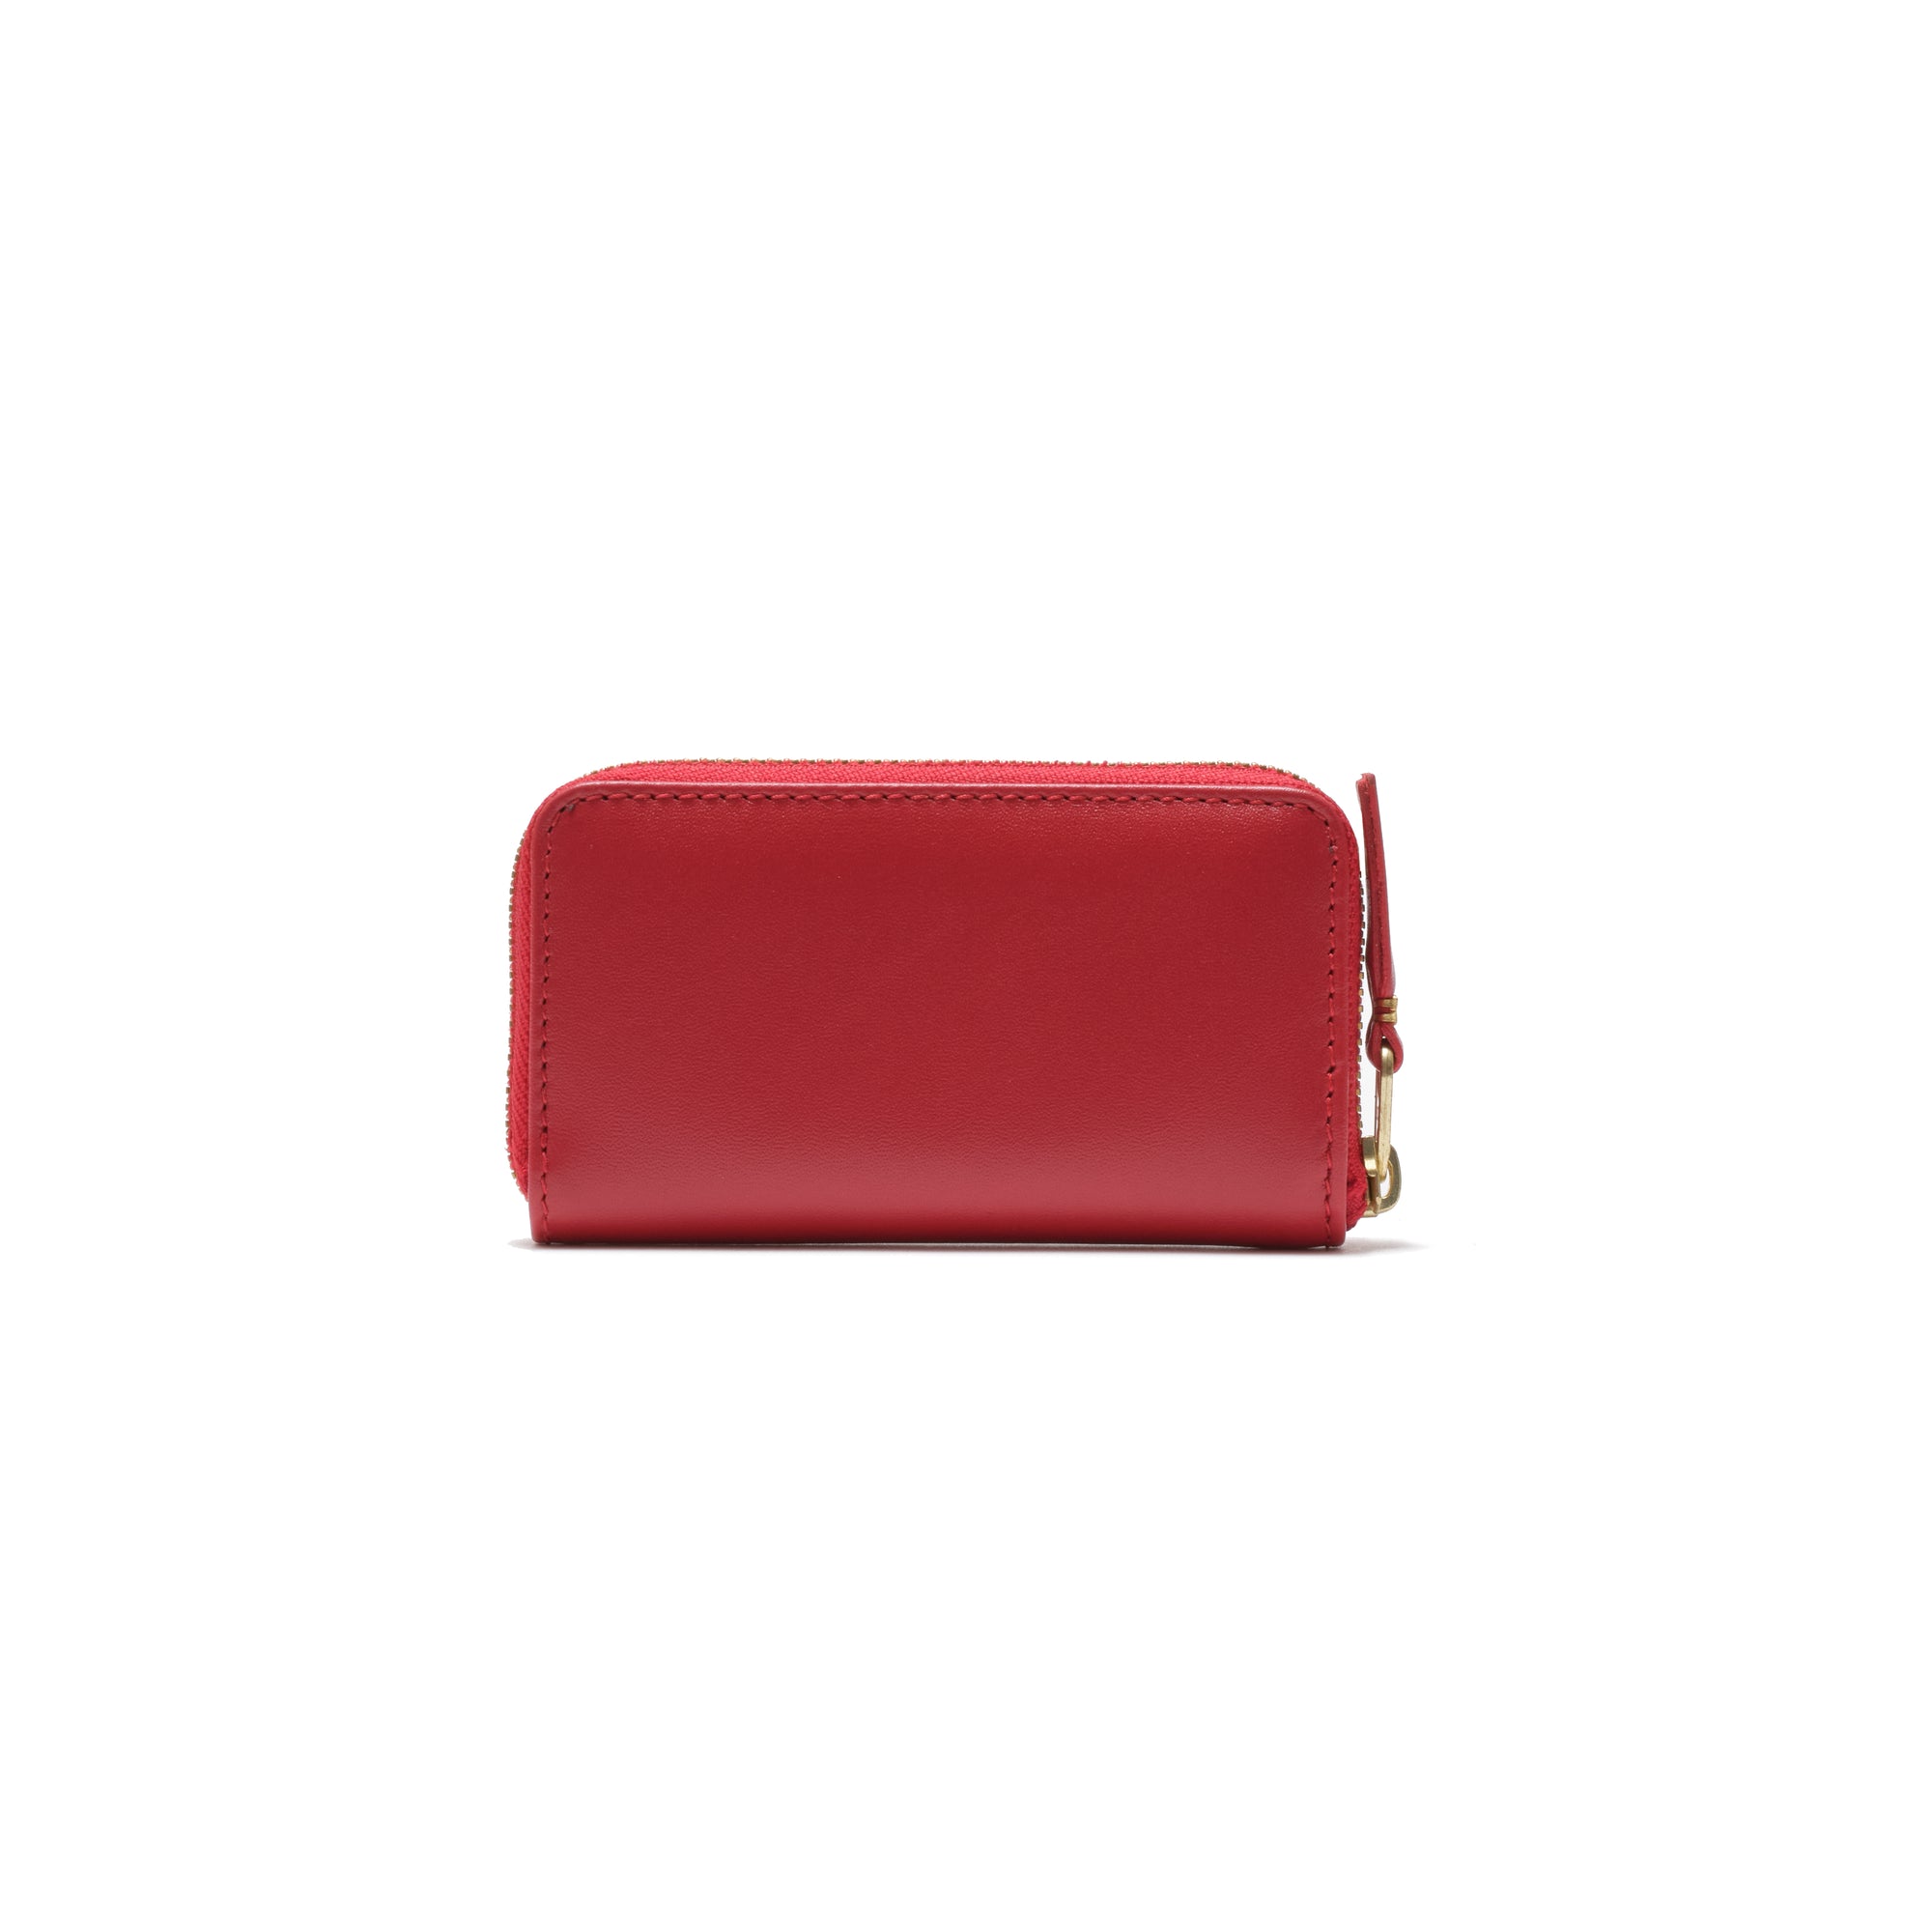 CDG WALLET - Colored Leather Line-8Z-A004 - (Red) view 2